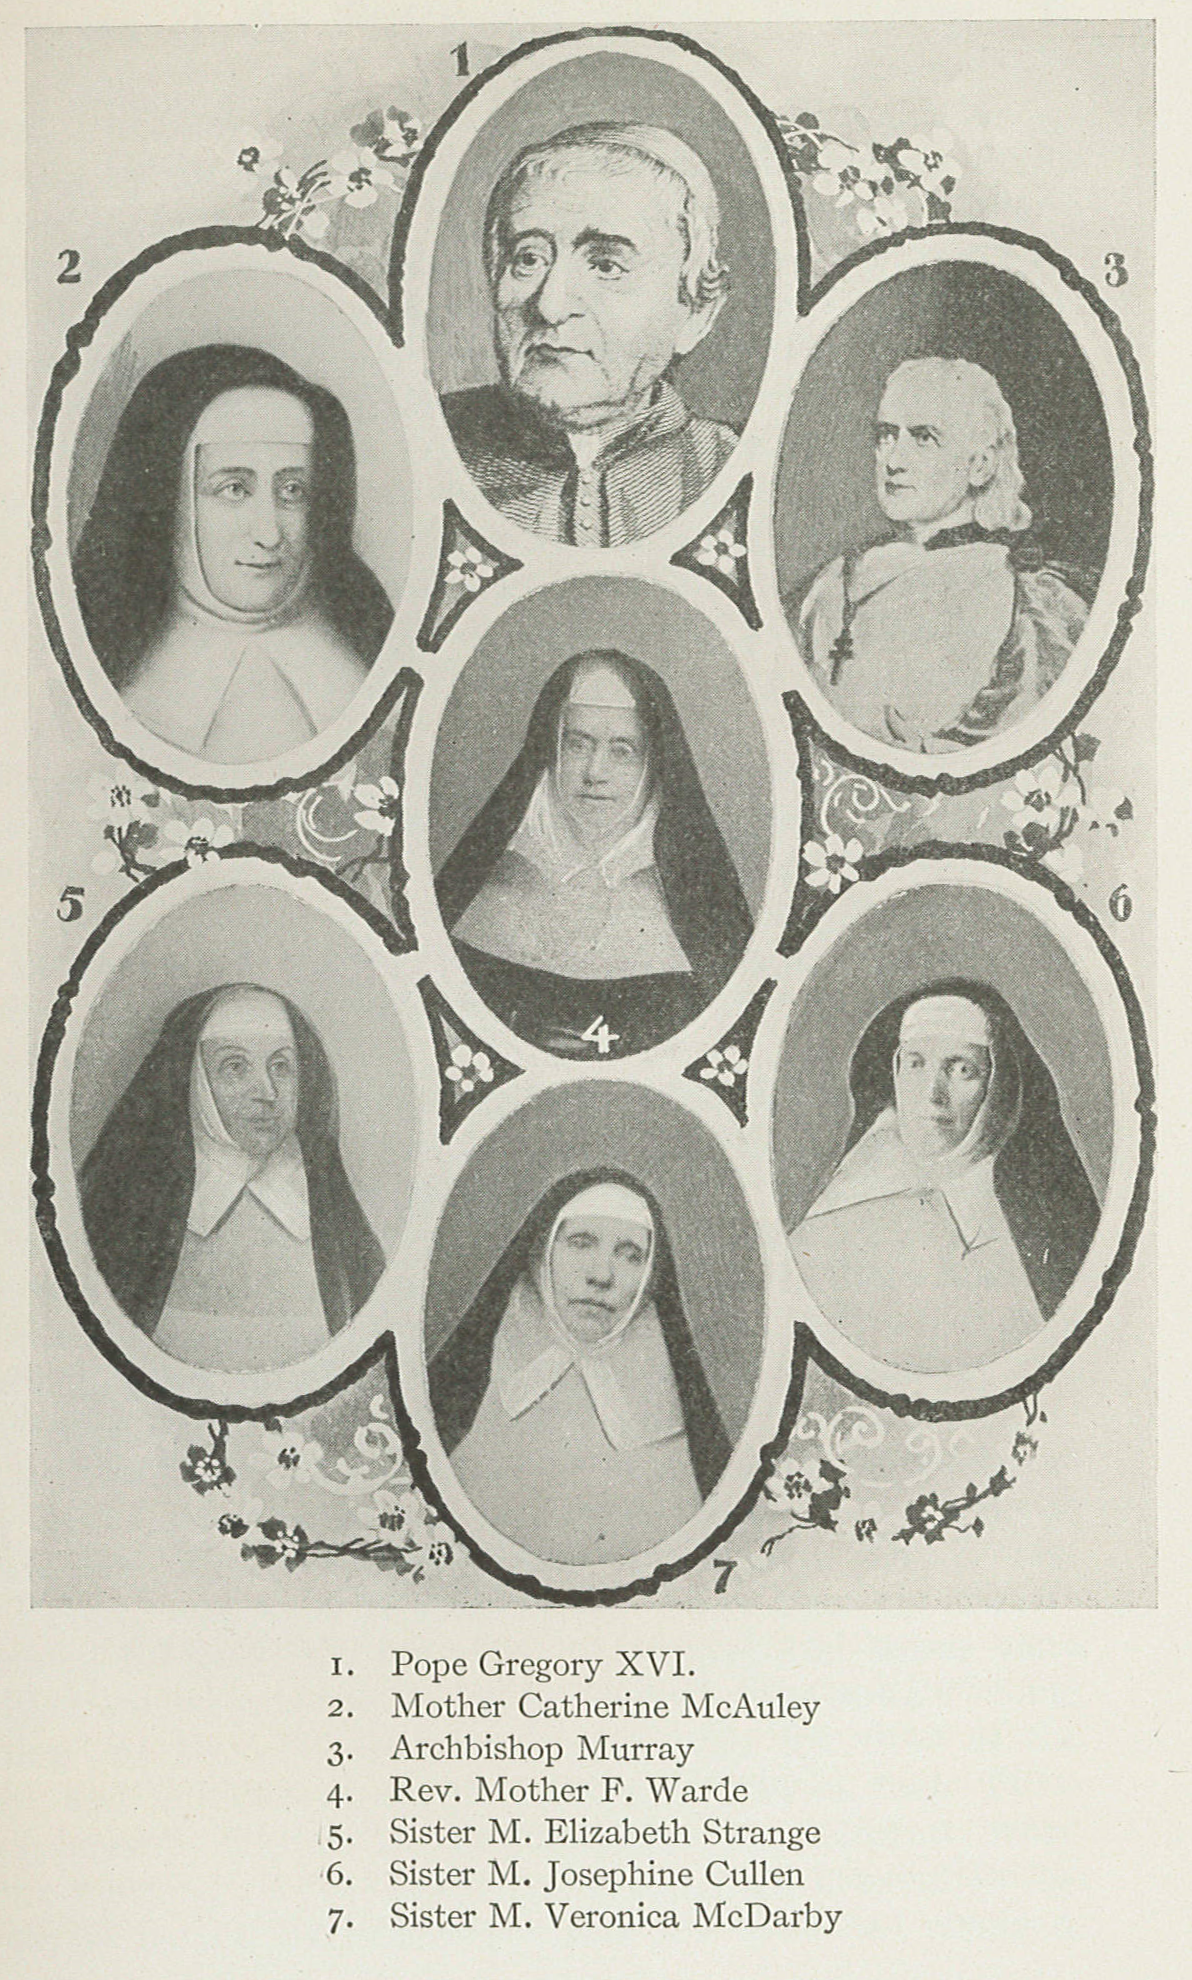 In this illustration from Memoirs of the Pittsburgh Sisters of Mercy, Sister Veronica McDarby is centered at the bottom, labeled 7. 